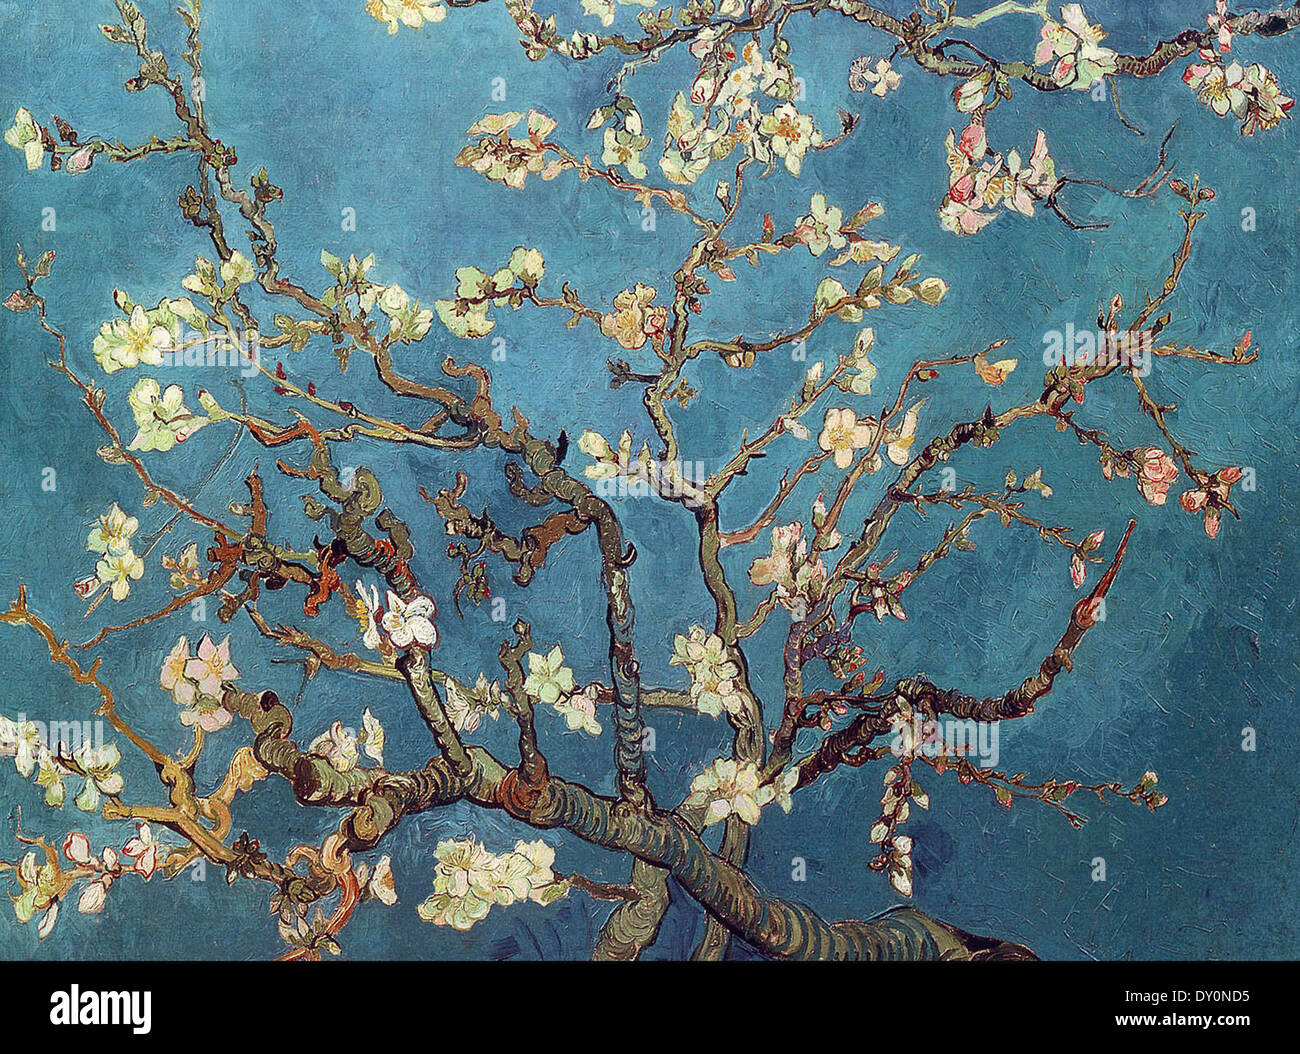 Vincent van Gogh Branch of an Almond Tree in Blossom Stock Photo - Alamy